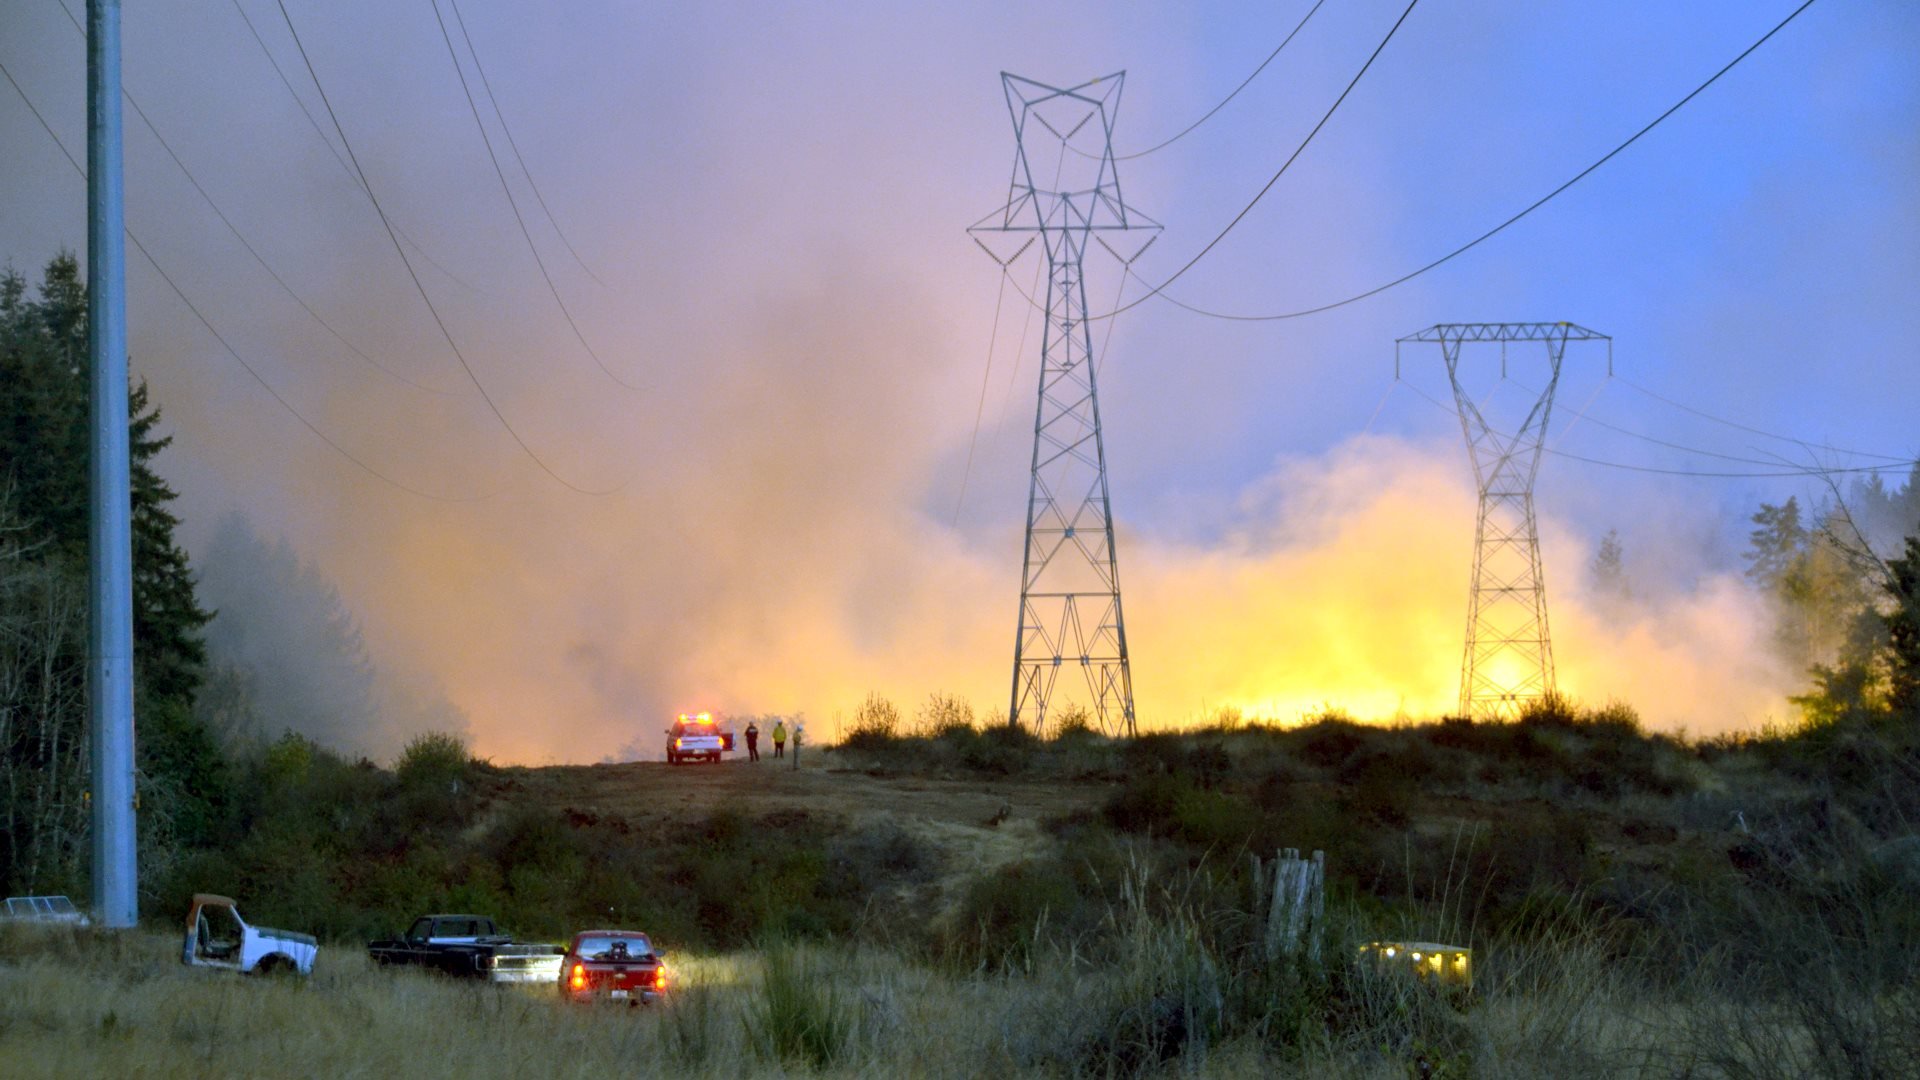 Wildfire threat to utility lines